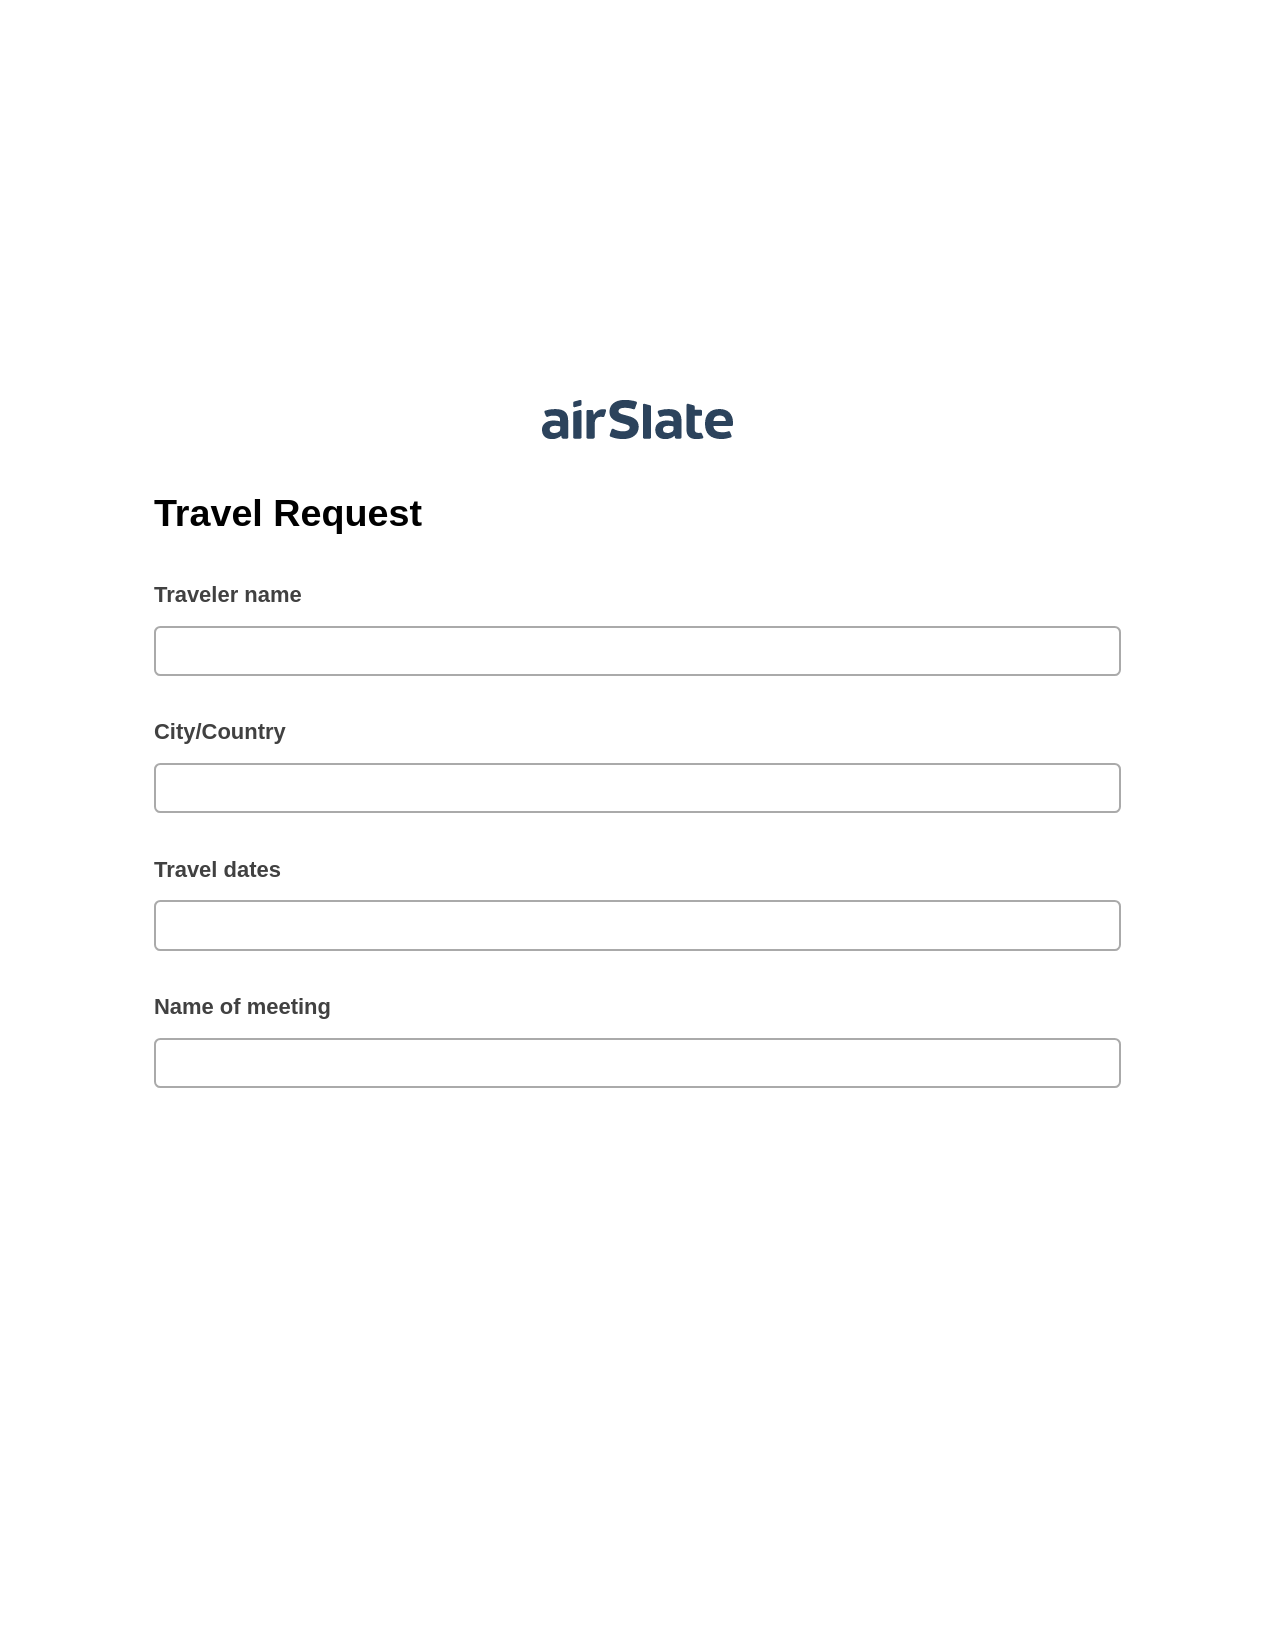 Travel Request Pre-fill Dropdowns from CSV File Bot, Unassign Role Bot, OneDrive Bot